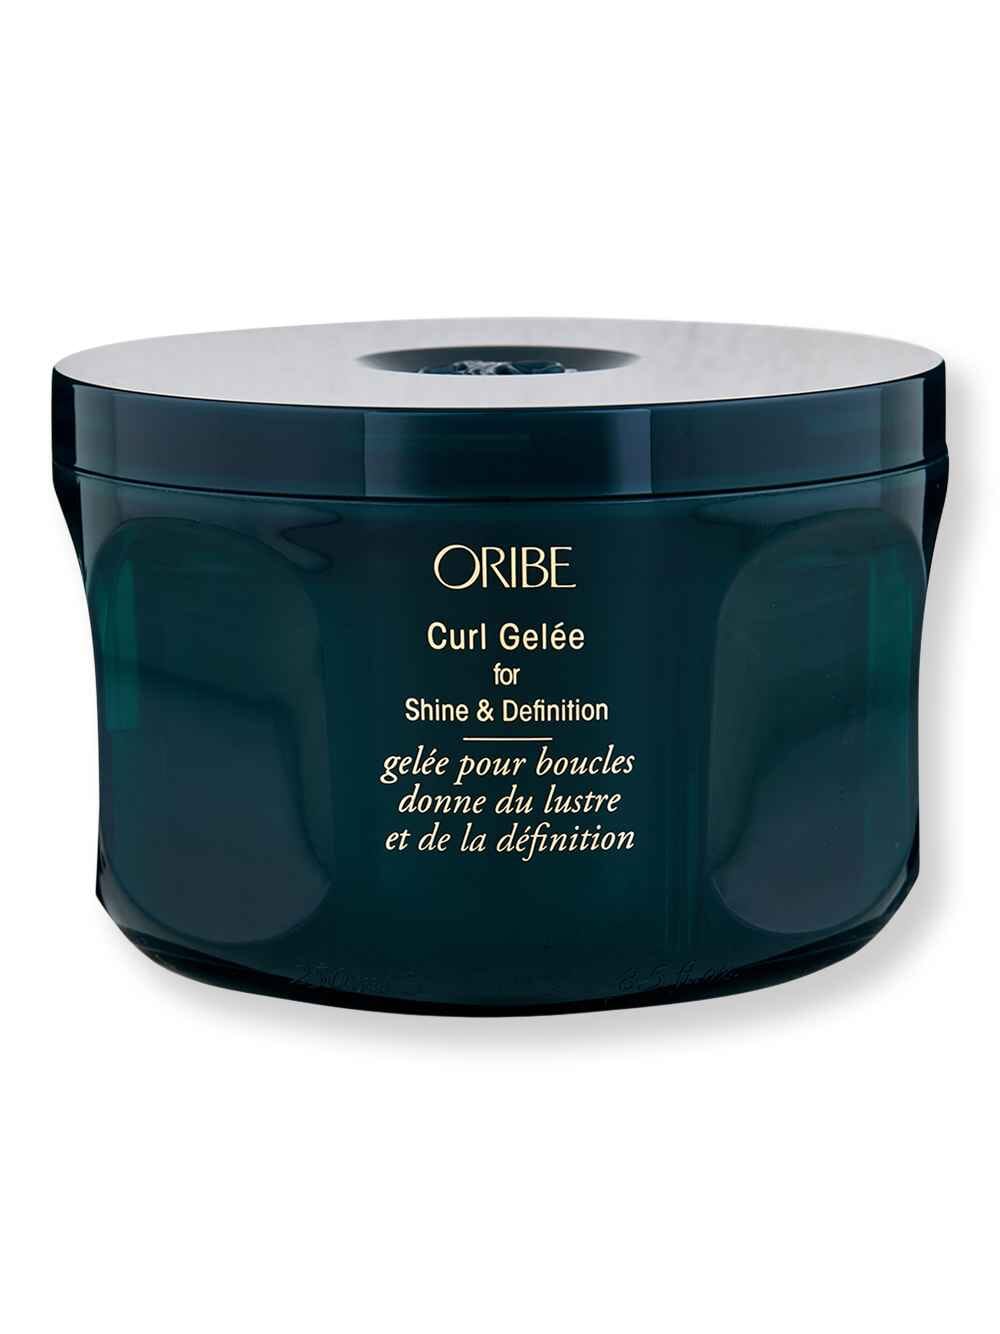 Oribe Oribe Curl Gelee for Shine & Definition 8.5 oz250 ml Styling Treatments 